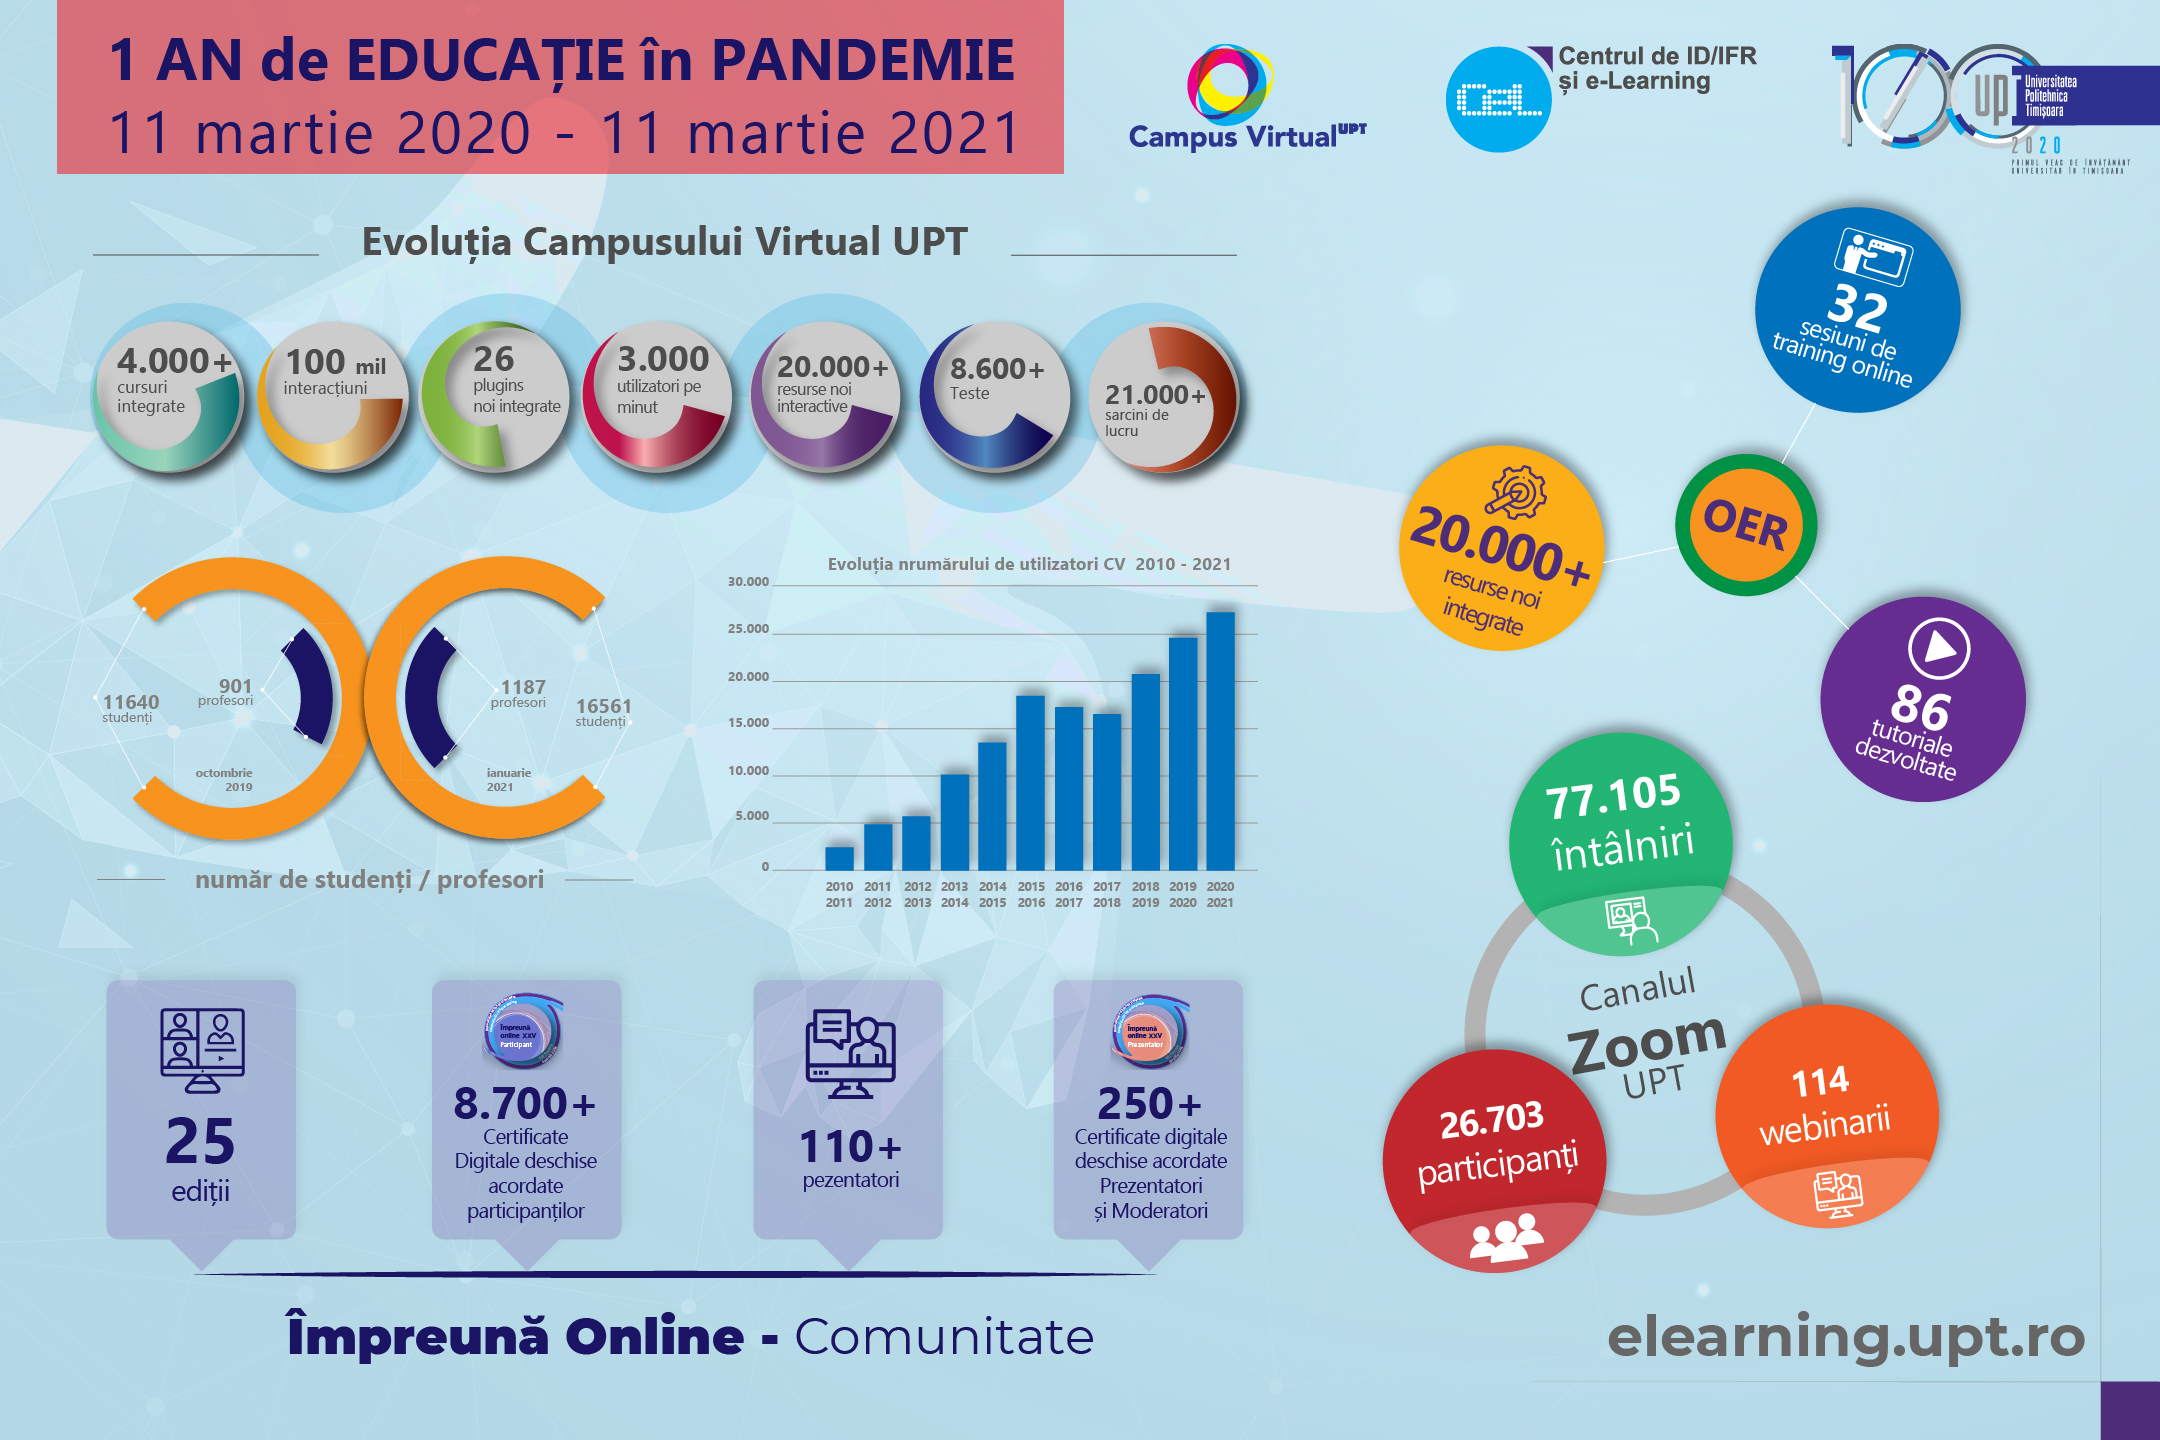 A year of pandemic education - in numbers and facts